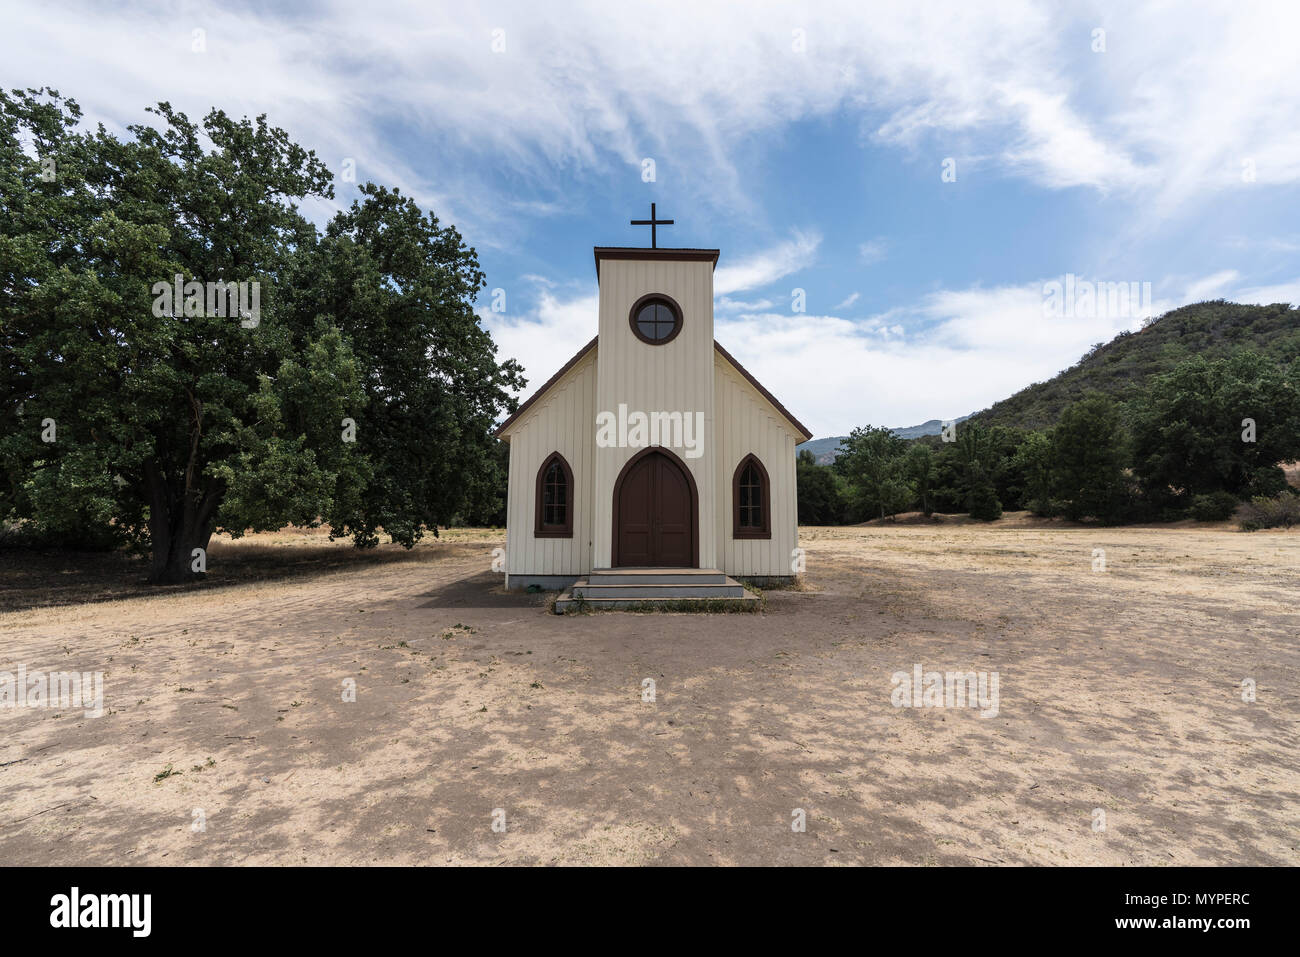 Small historic movie set church owned by US National Park Service in the Santa Monica Mountains National Recreation Area near Los Angeles California. Stock Photo